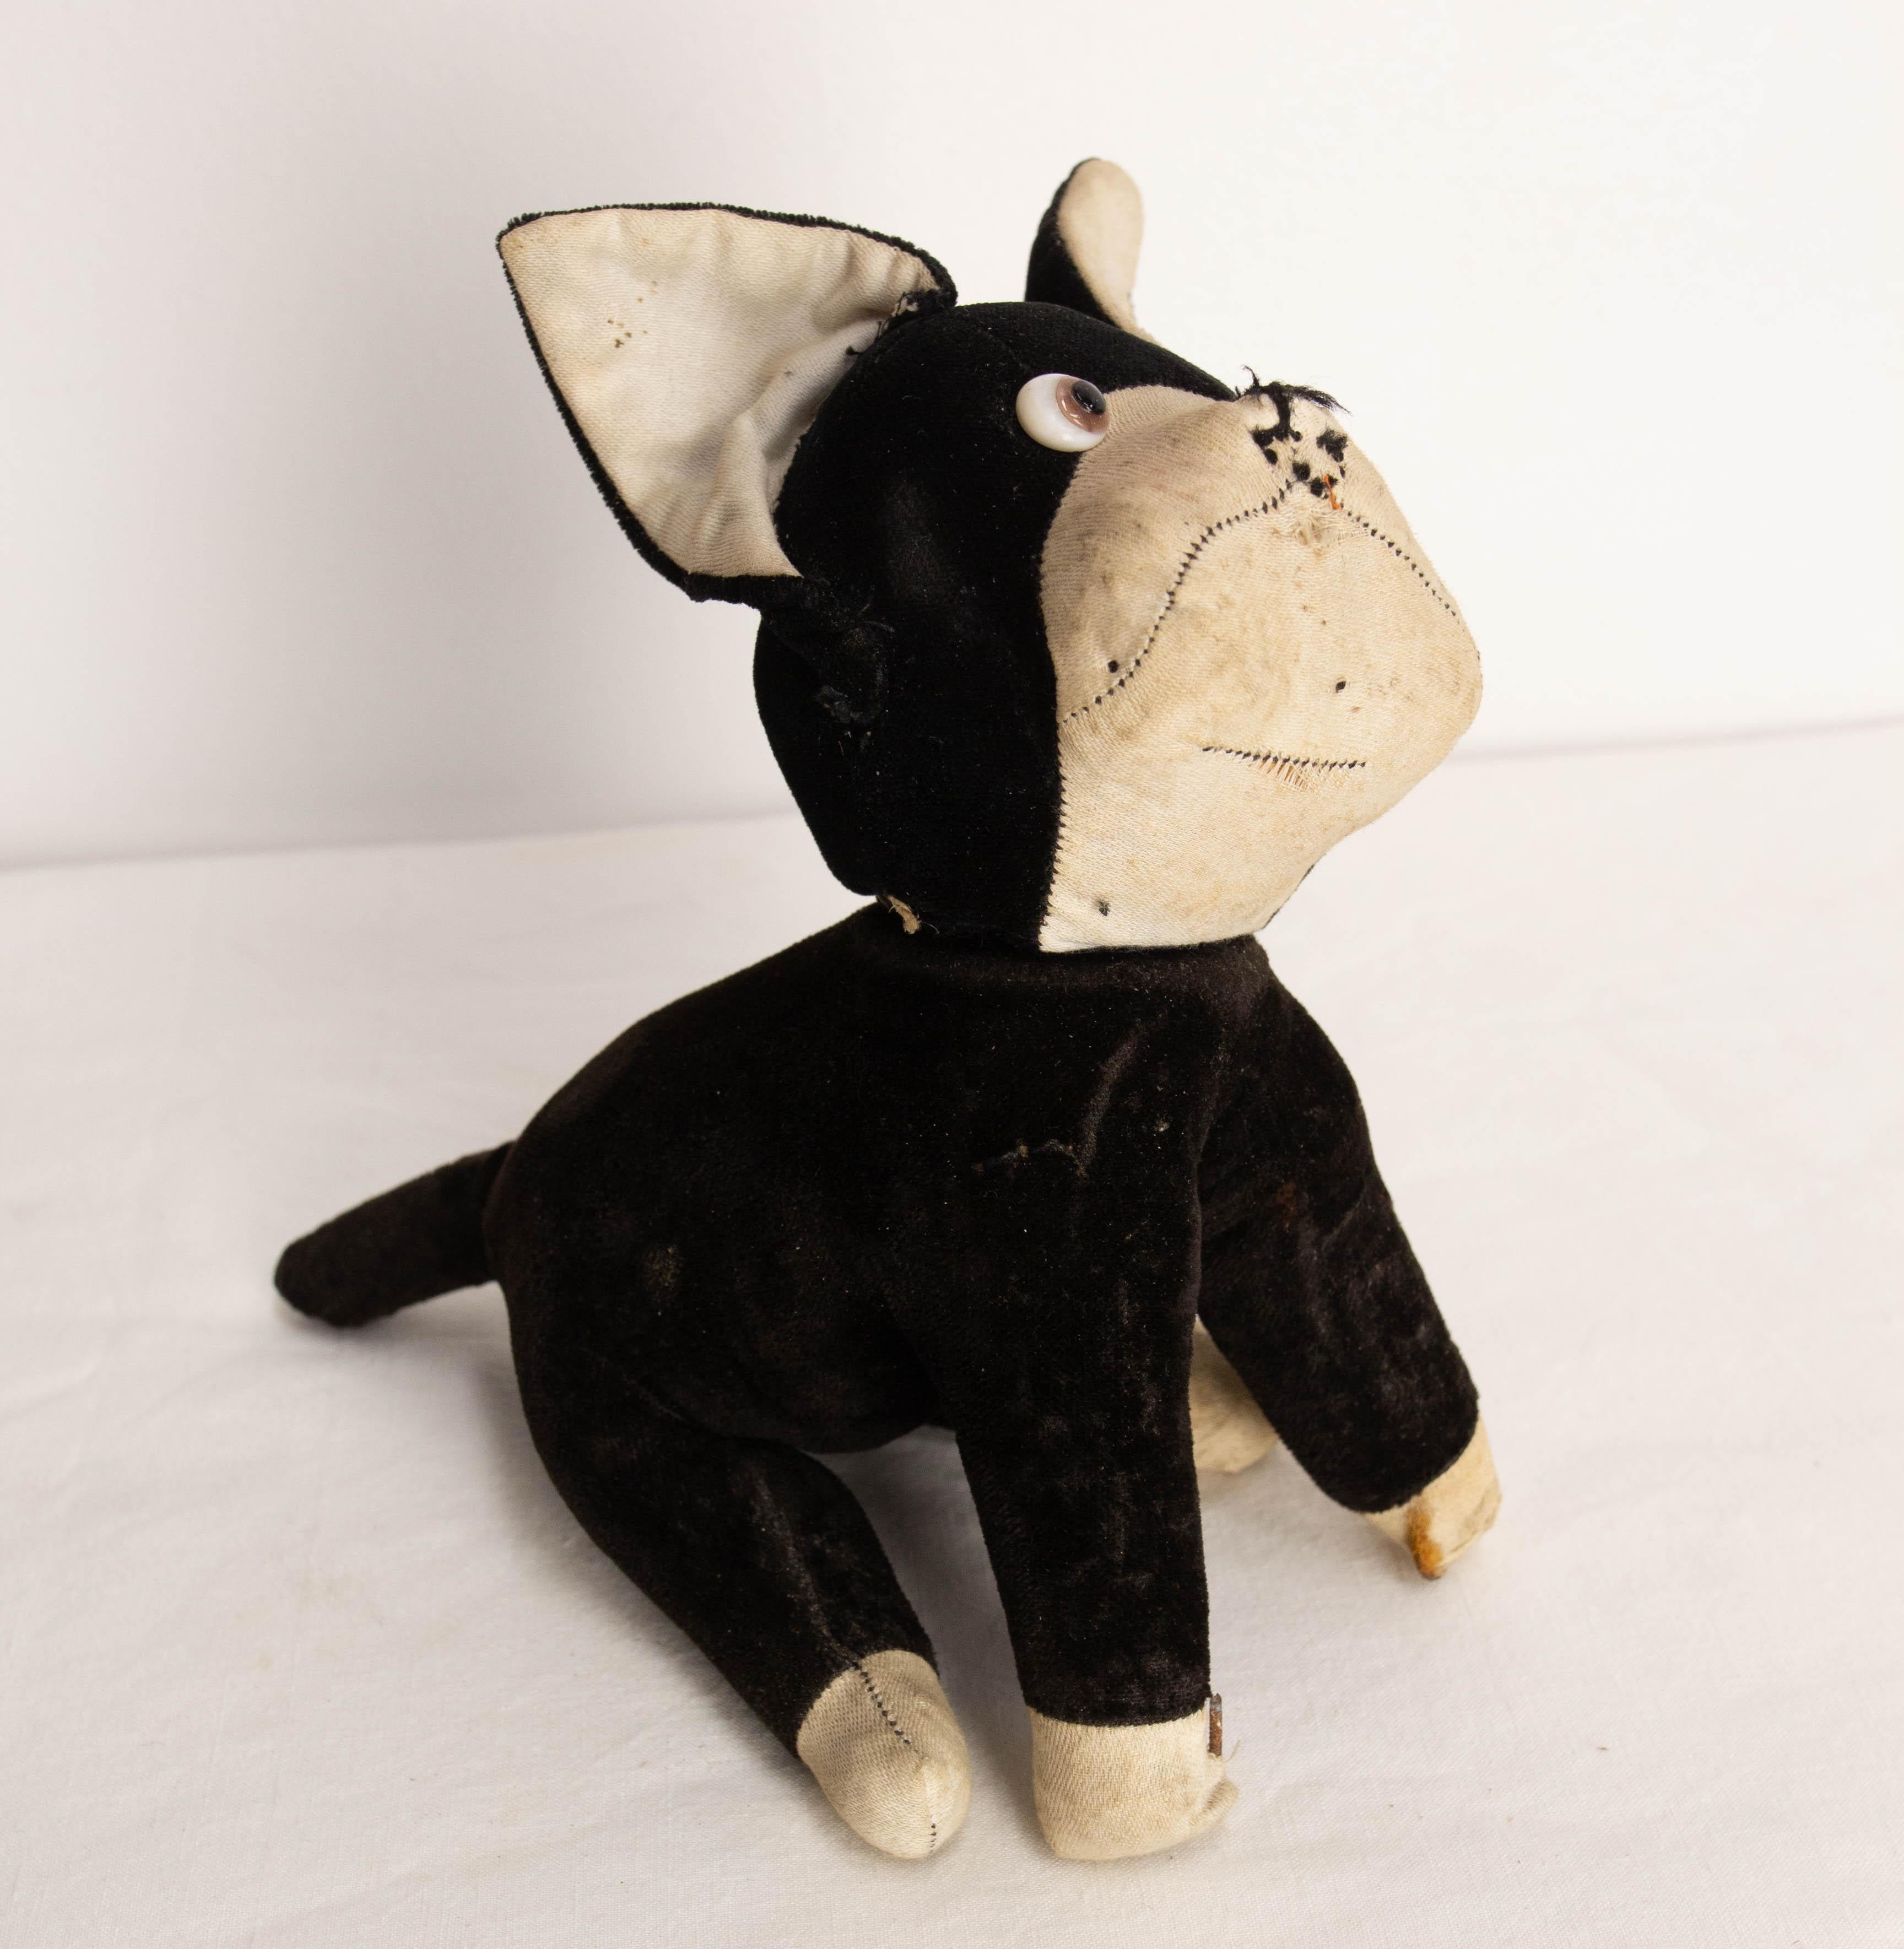 Little white and black velvet felt children toy, 1950
A part of the iron frame is visible at the bottom of one of the front legs.
Vintage condition, so does has traces of age and use, so do view all pictures well.

Shipping:
19 / 11  / 17 cm